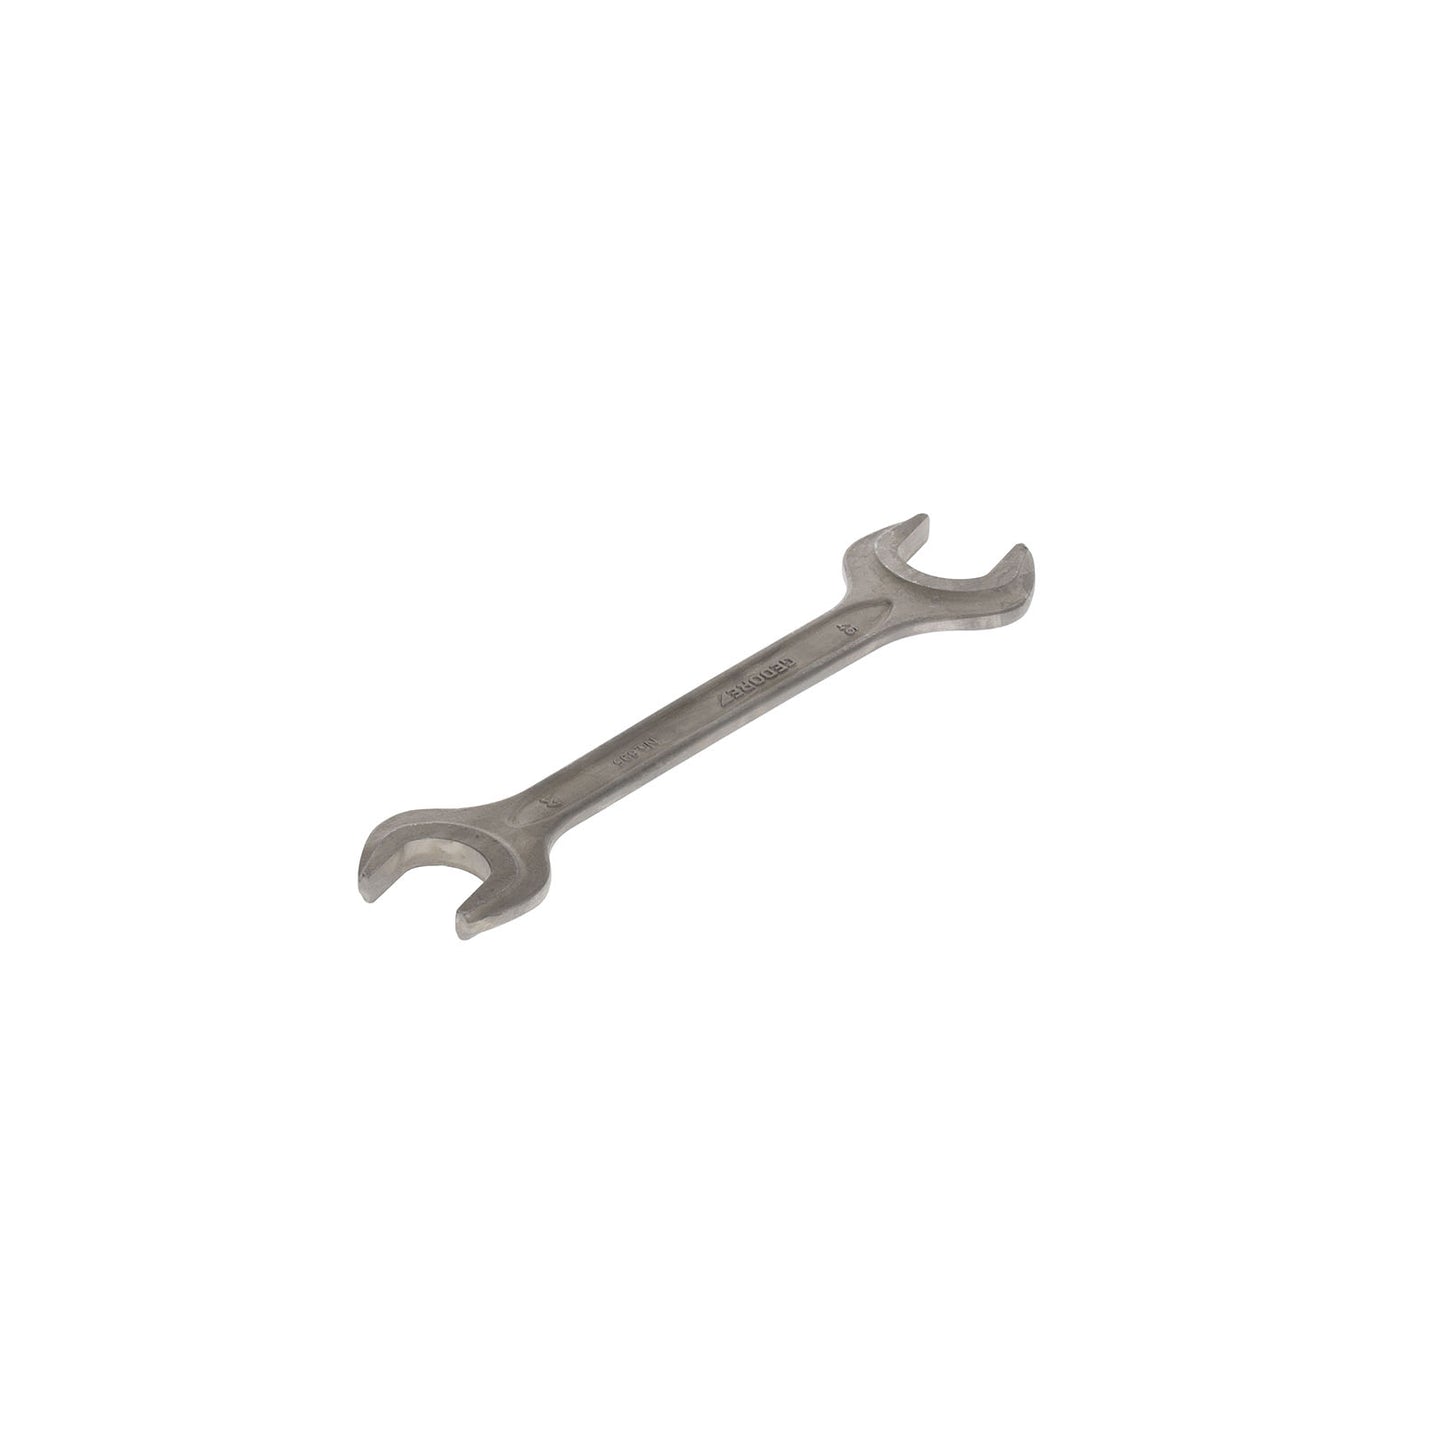 GEDORE 895 41X46 - 2-Mount Fixed Wrench, 41x46 (6588200)